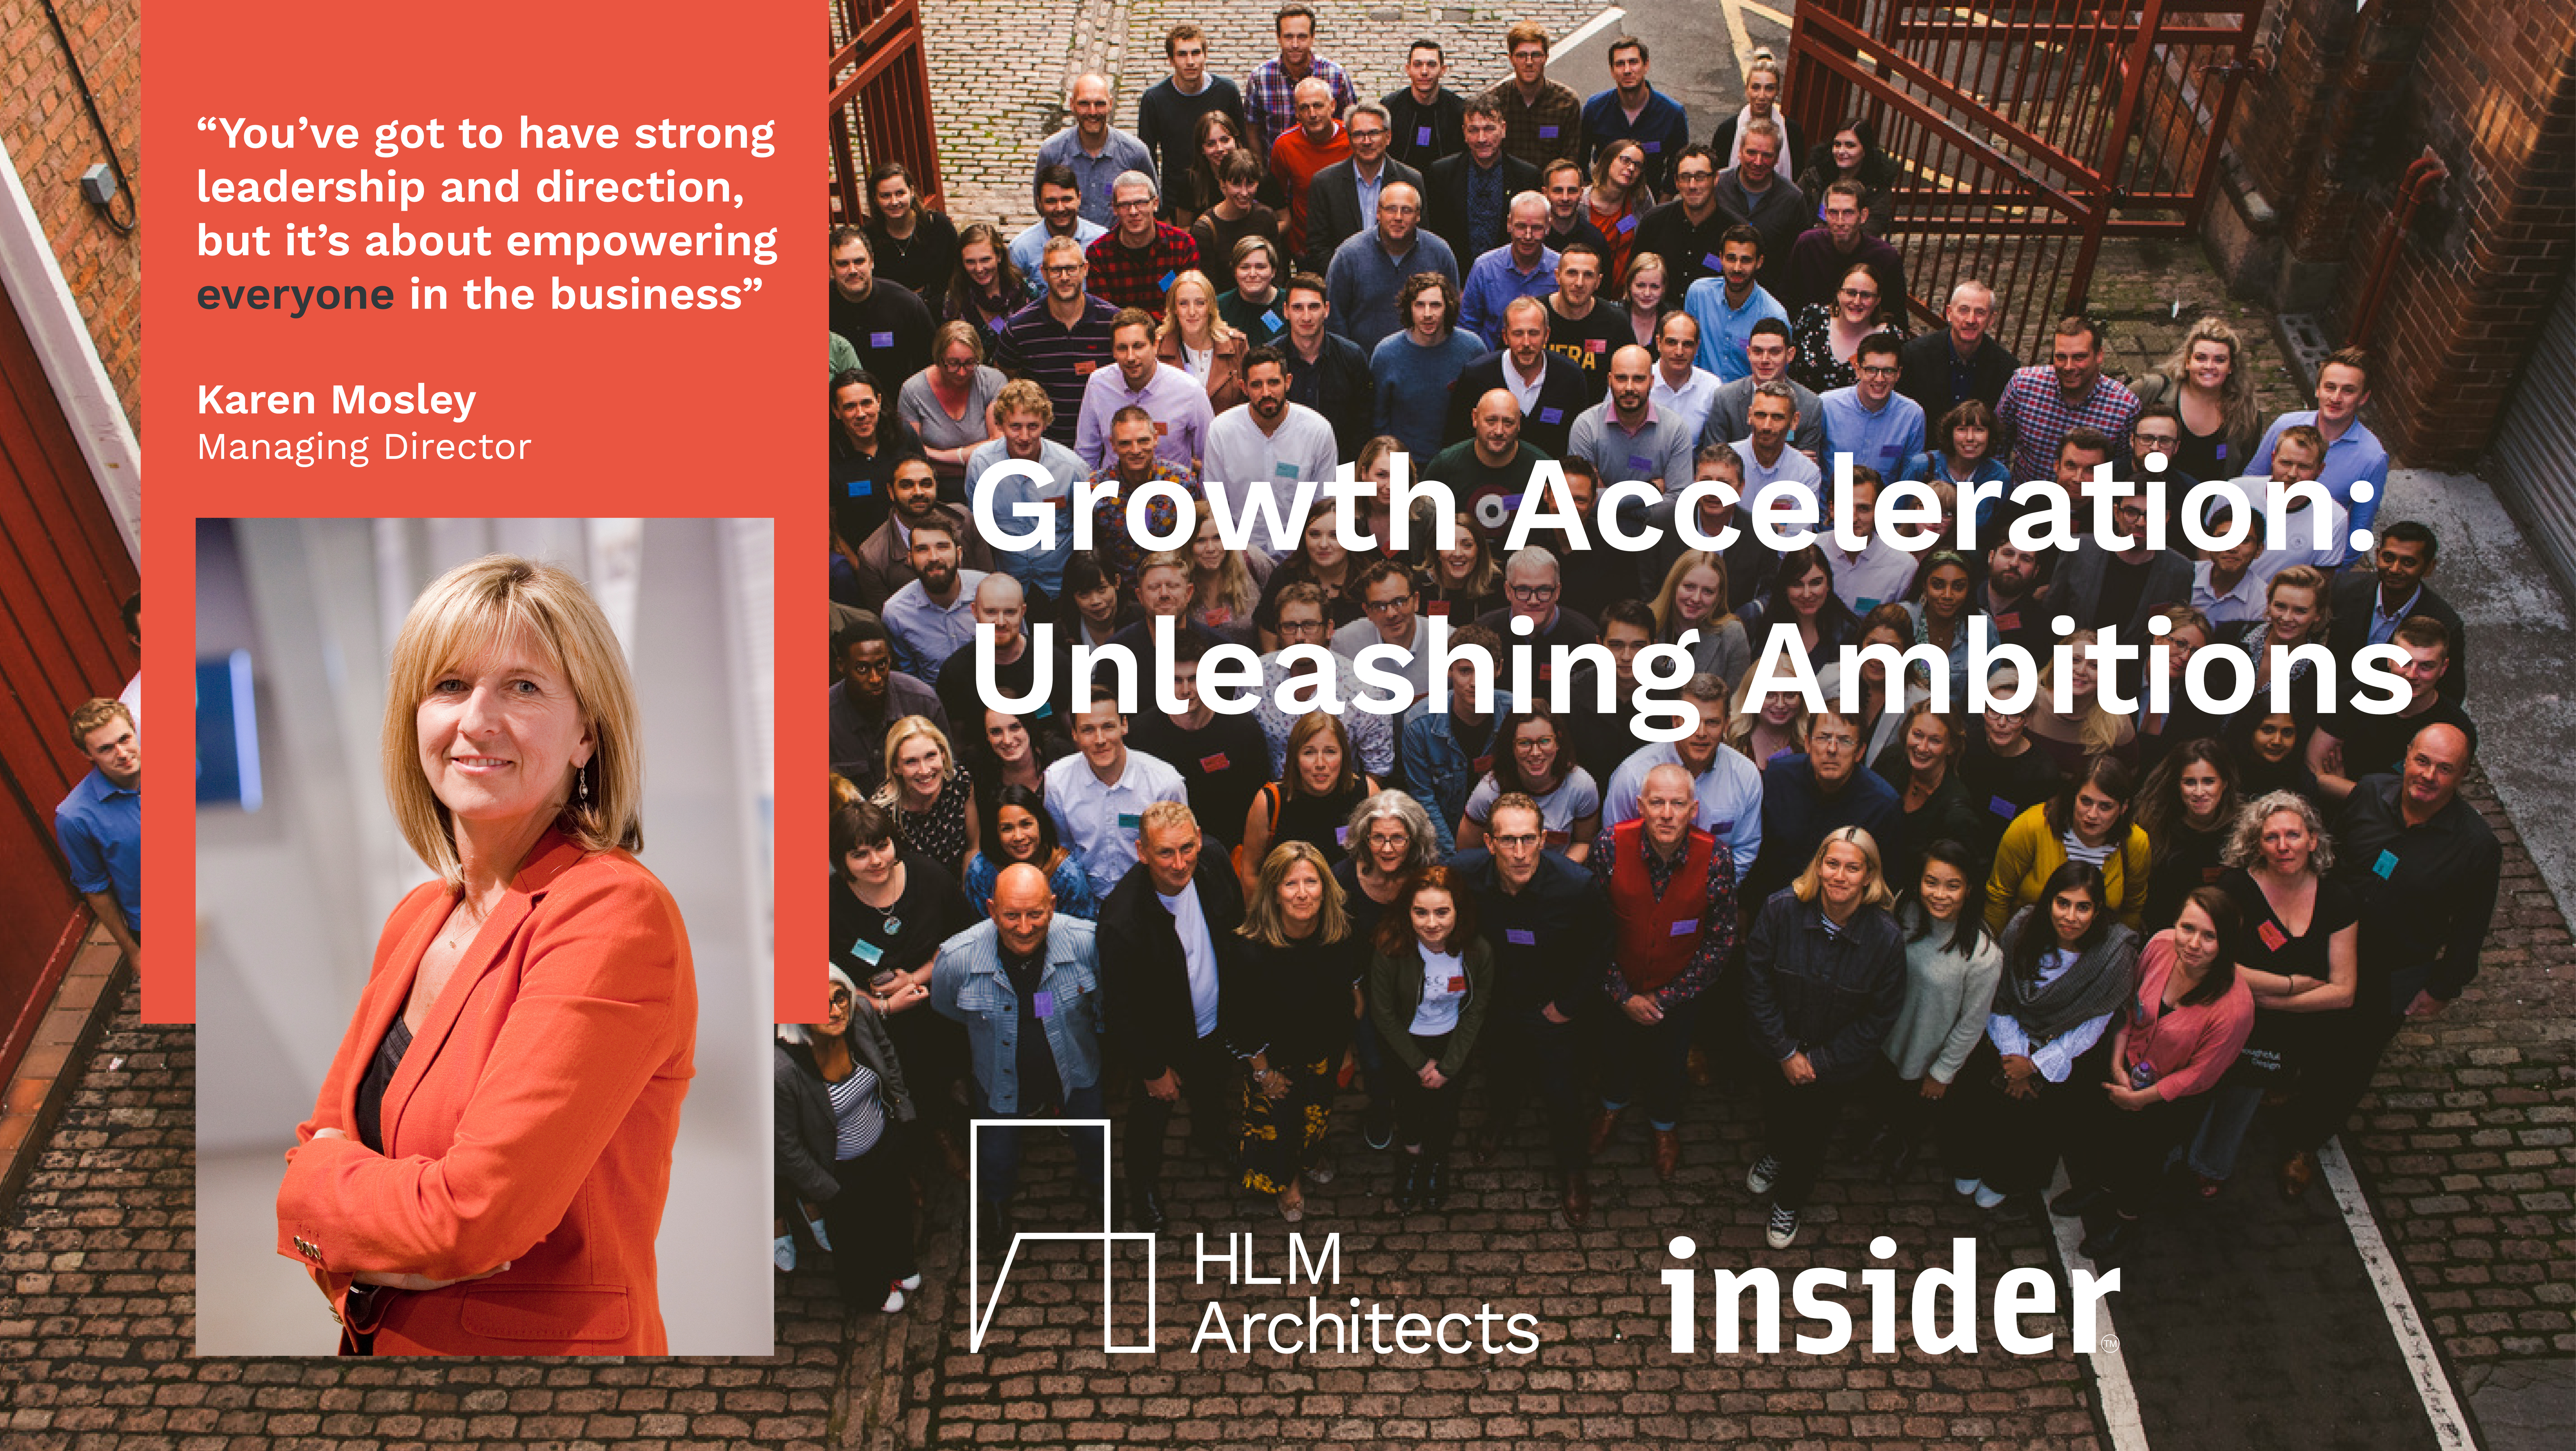 Growth Accelerator HLM Architects by Karen Mosley